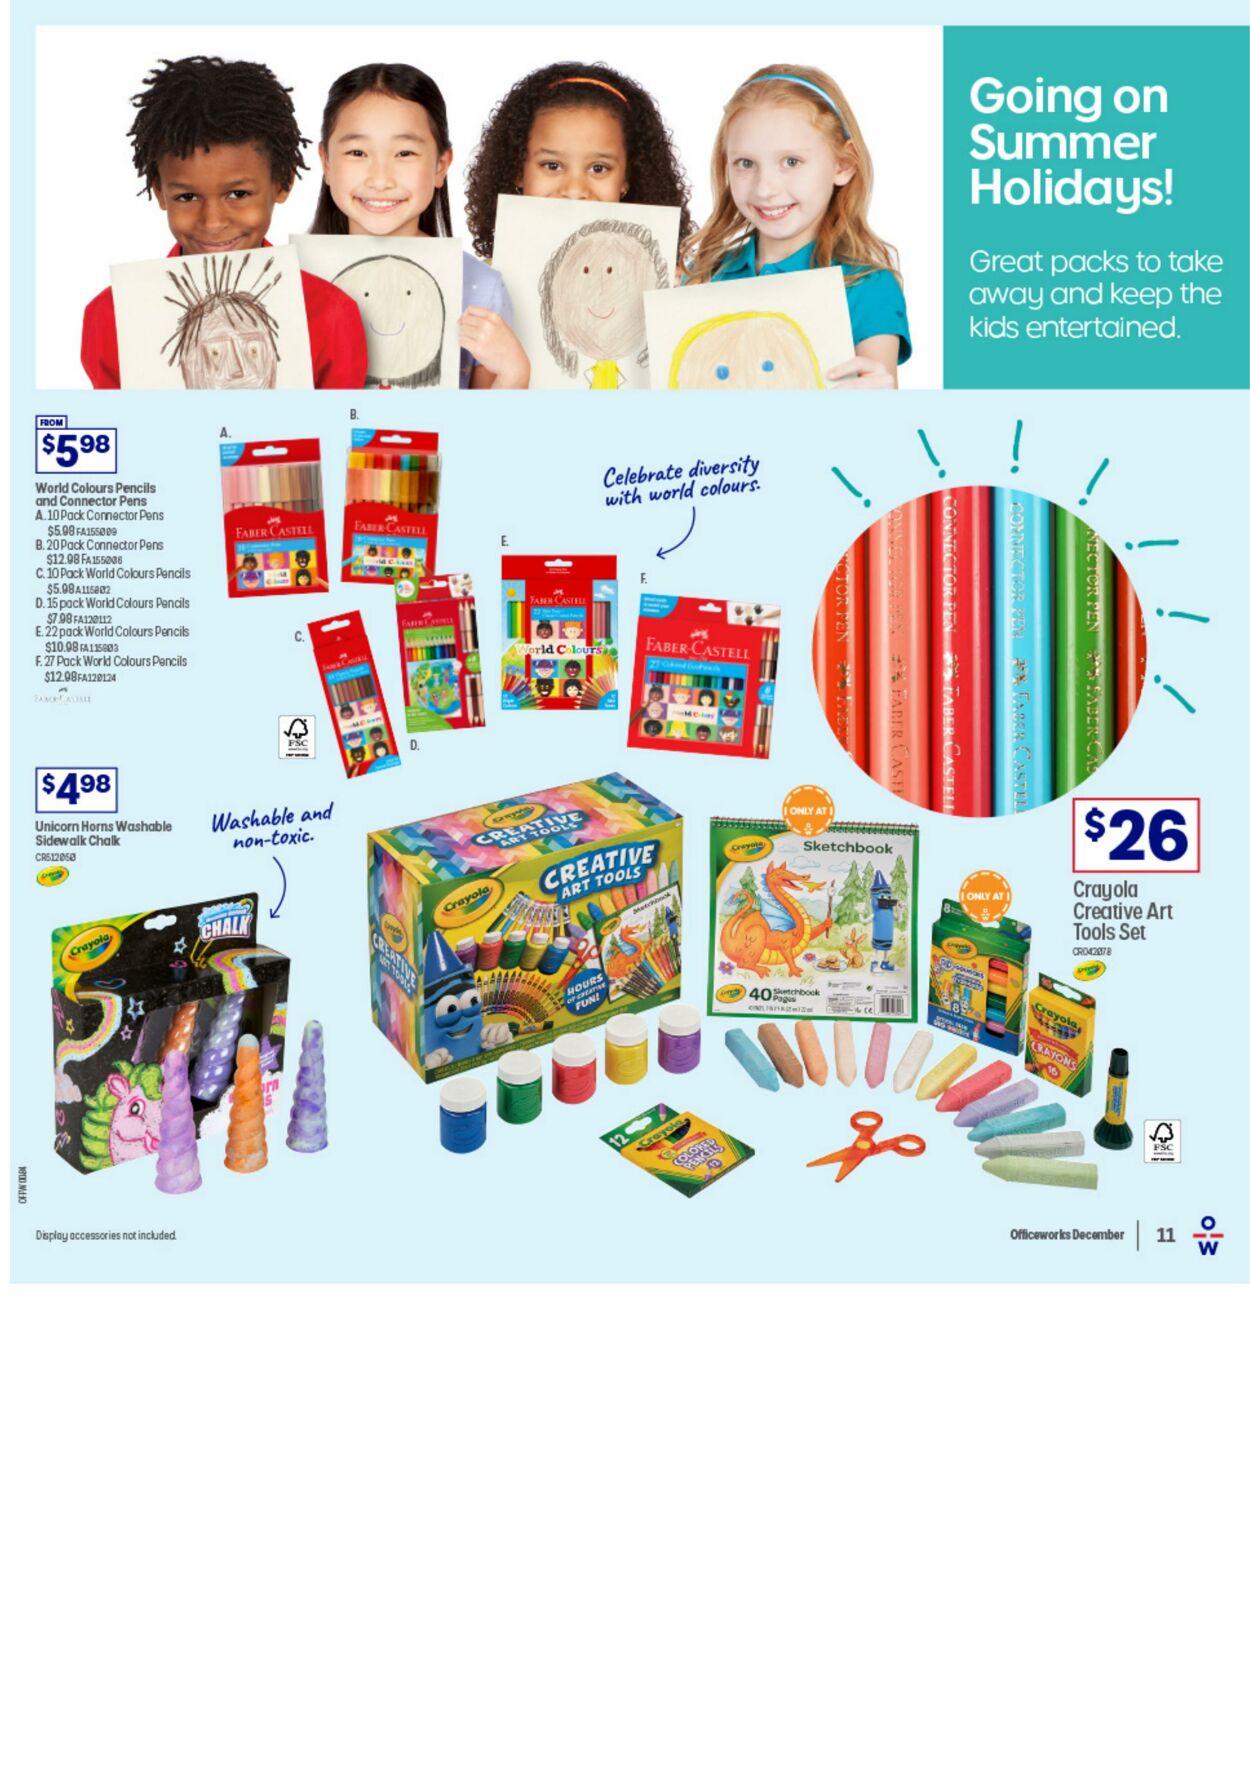 Catalogue Officeworks 08.01.2023 - 30.01.2023